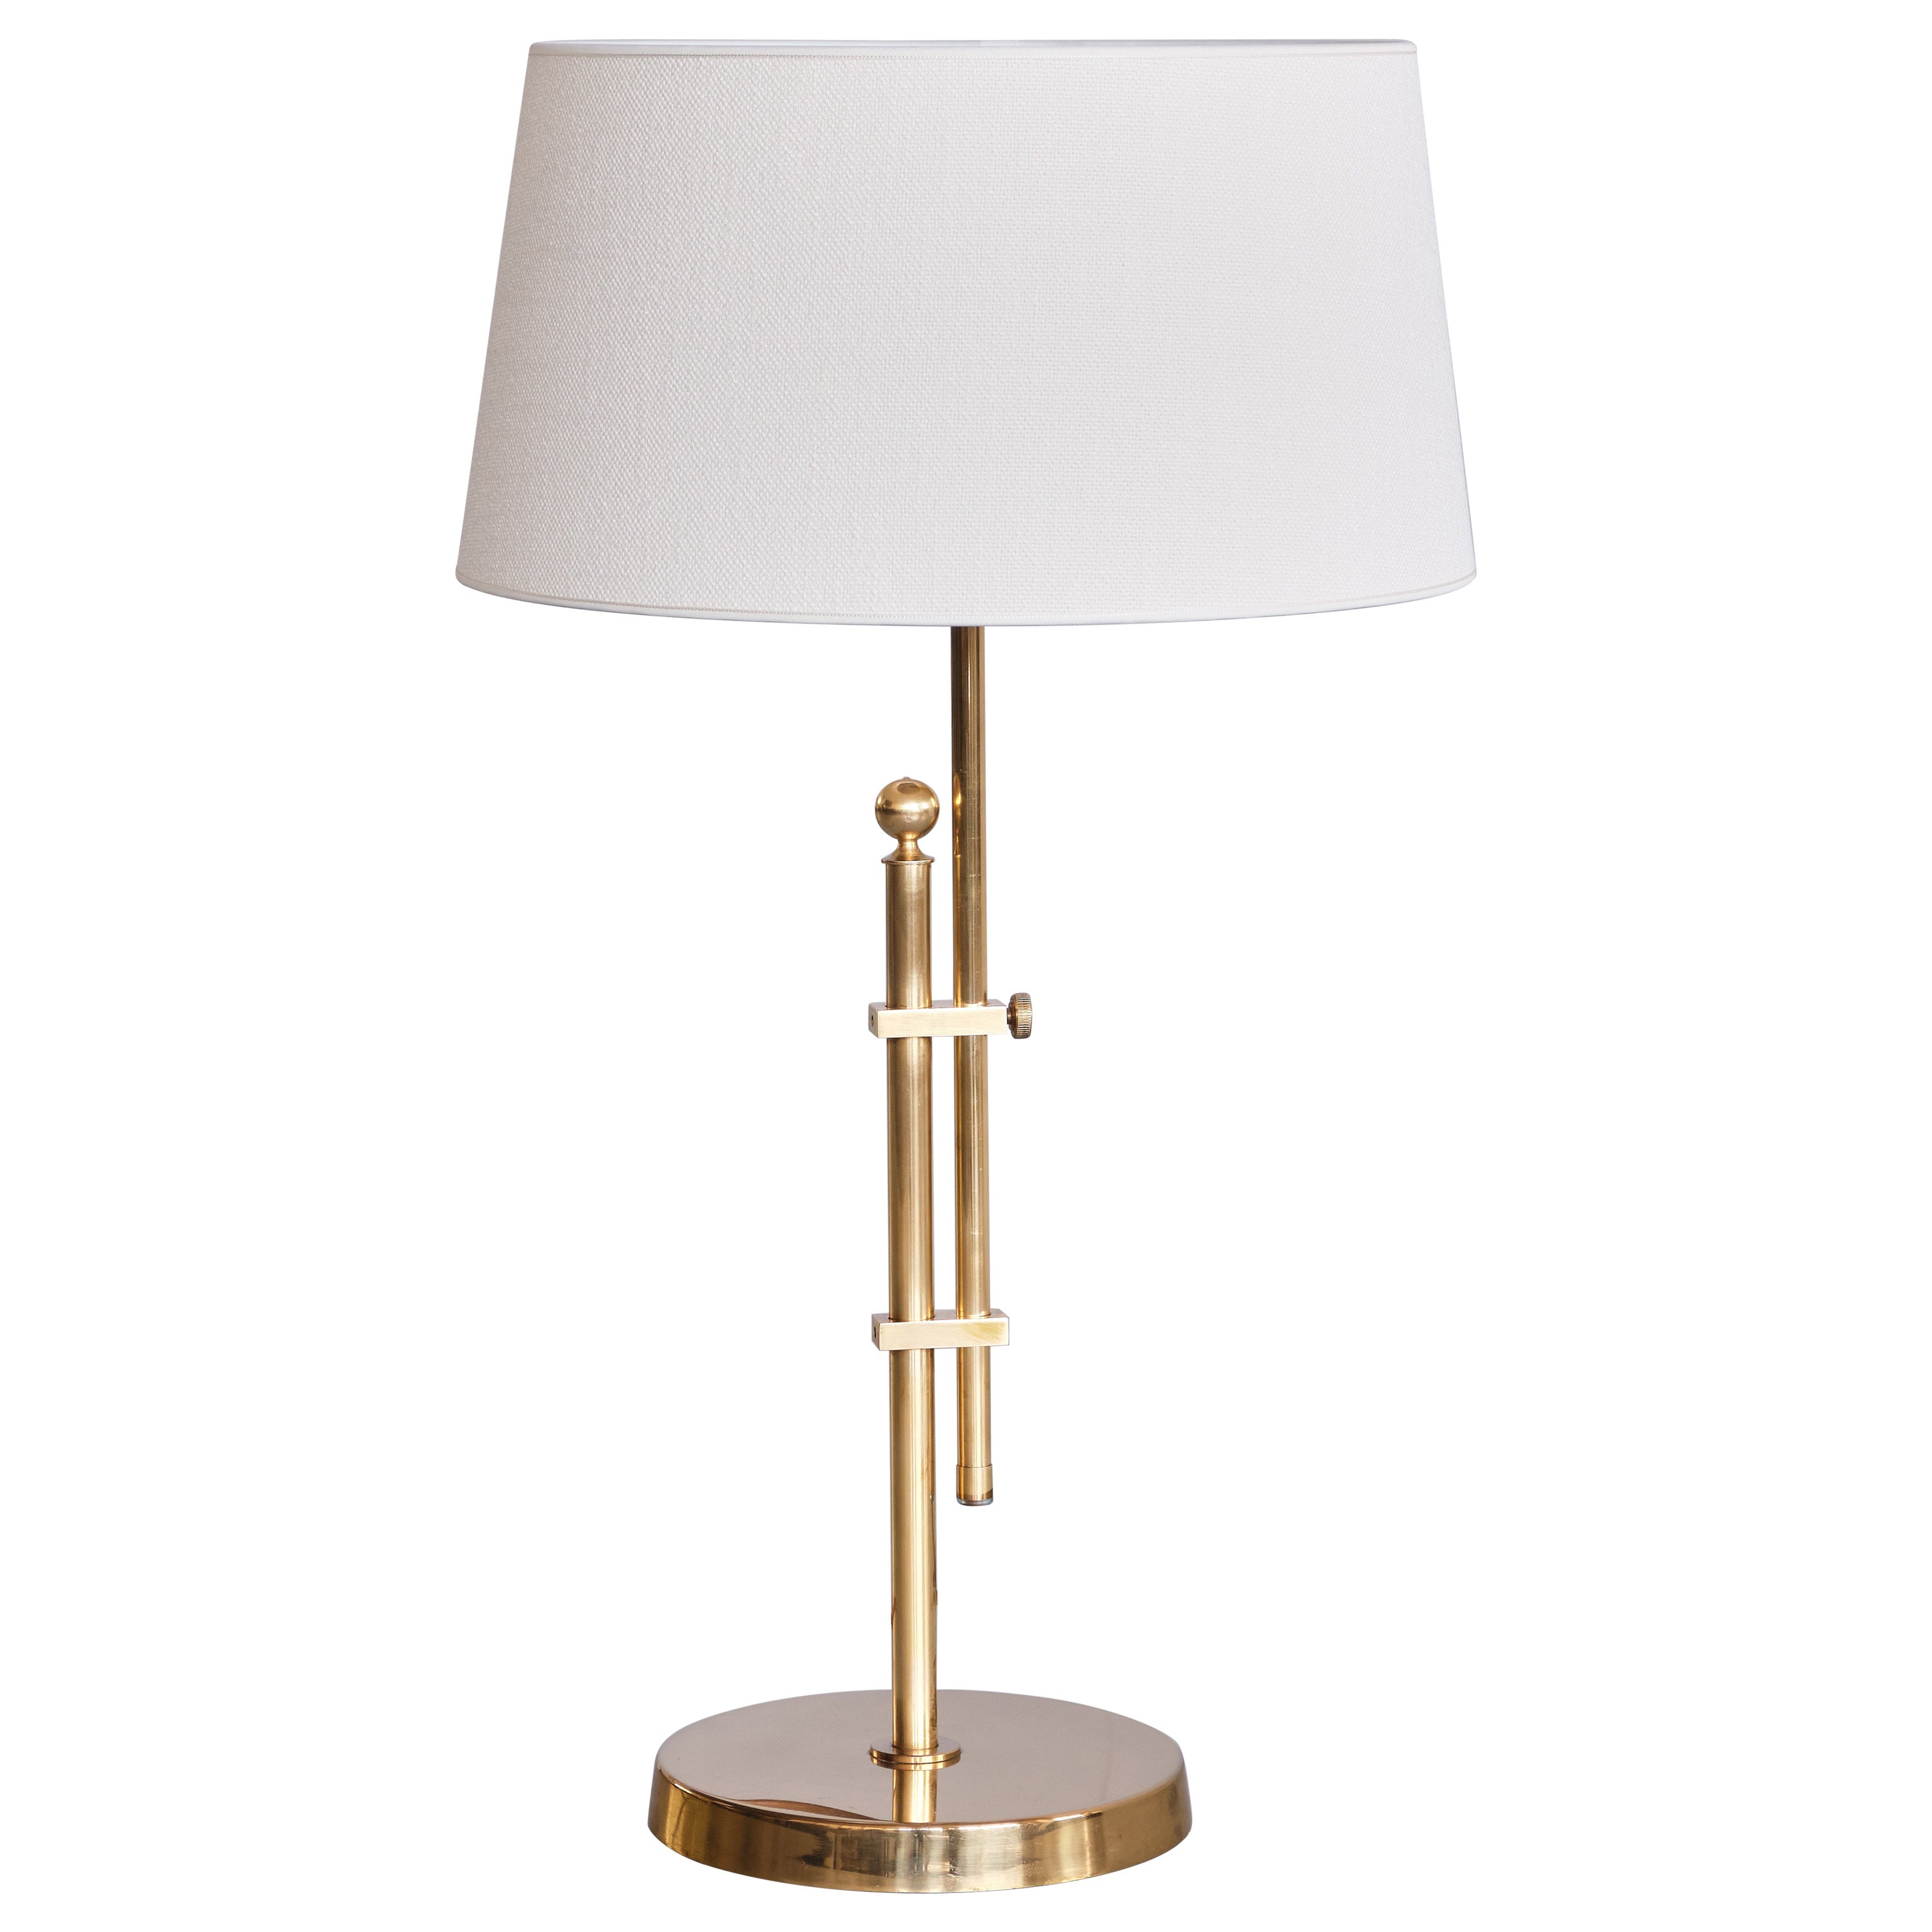 Bergboms B-131 Height Adjustable Table Lamp in Brass, Sweden, 1950s